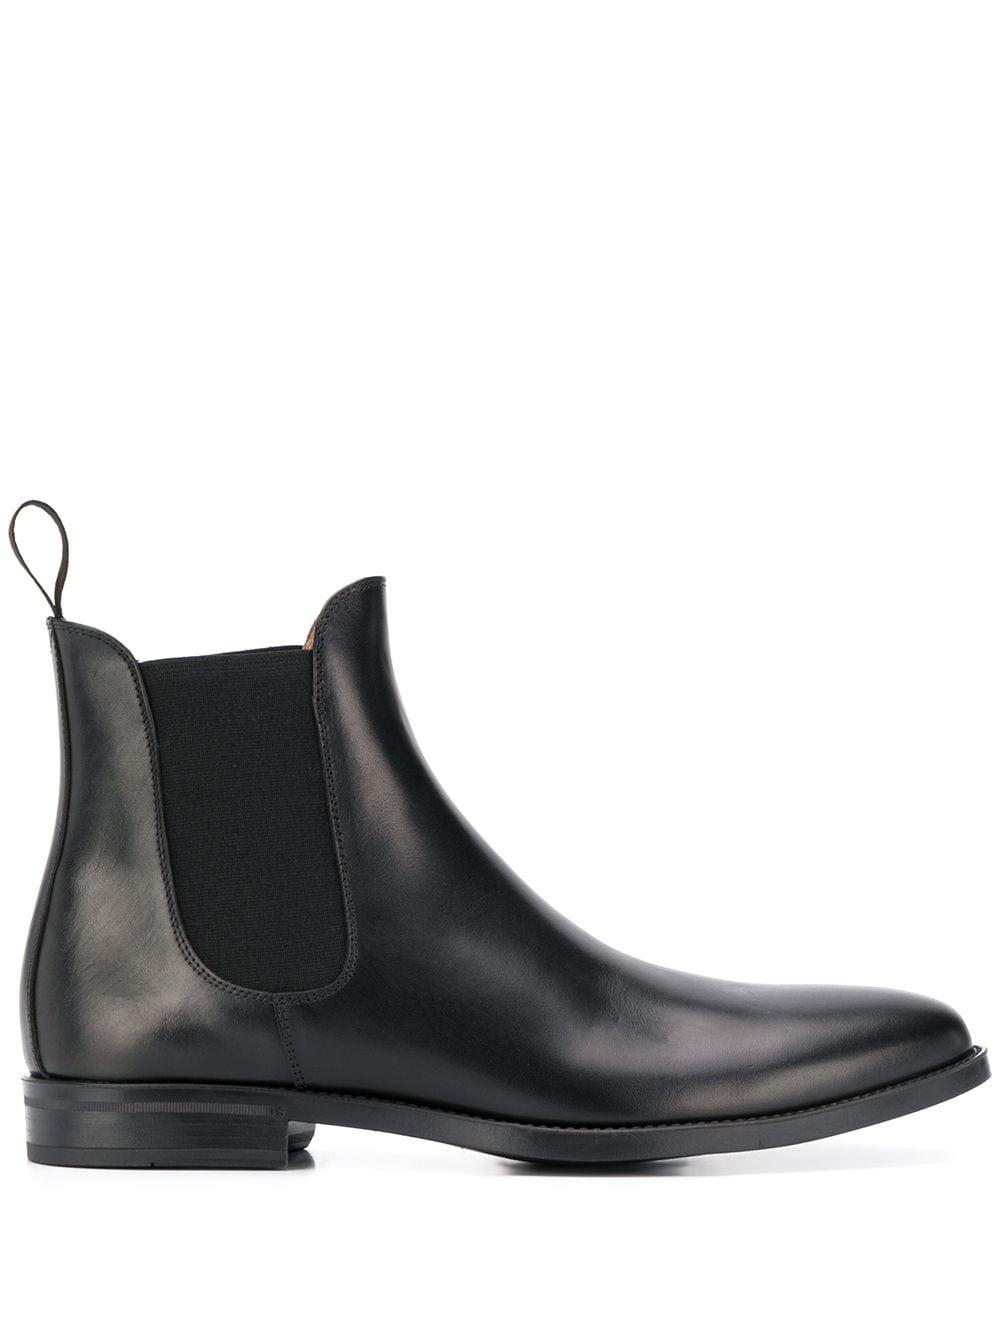 SCAROSSO Leather Giacomo Boots in Black for Men - Lyst